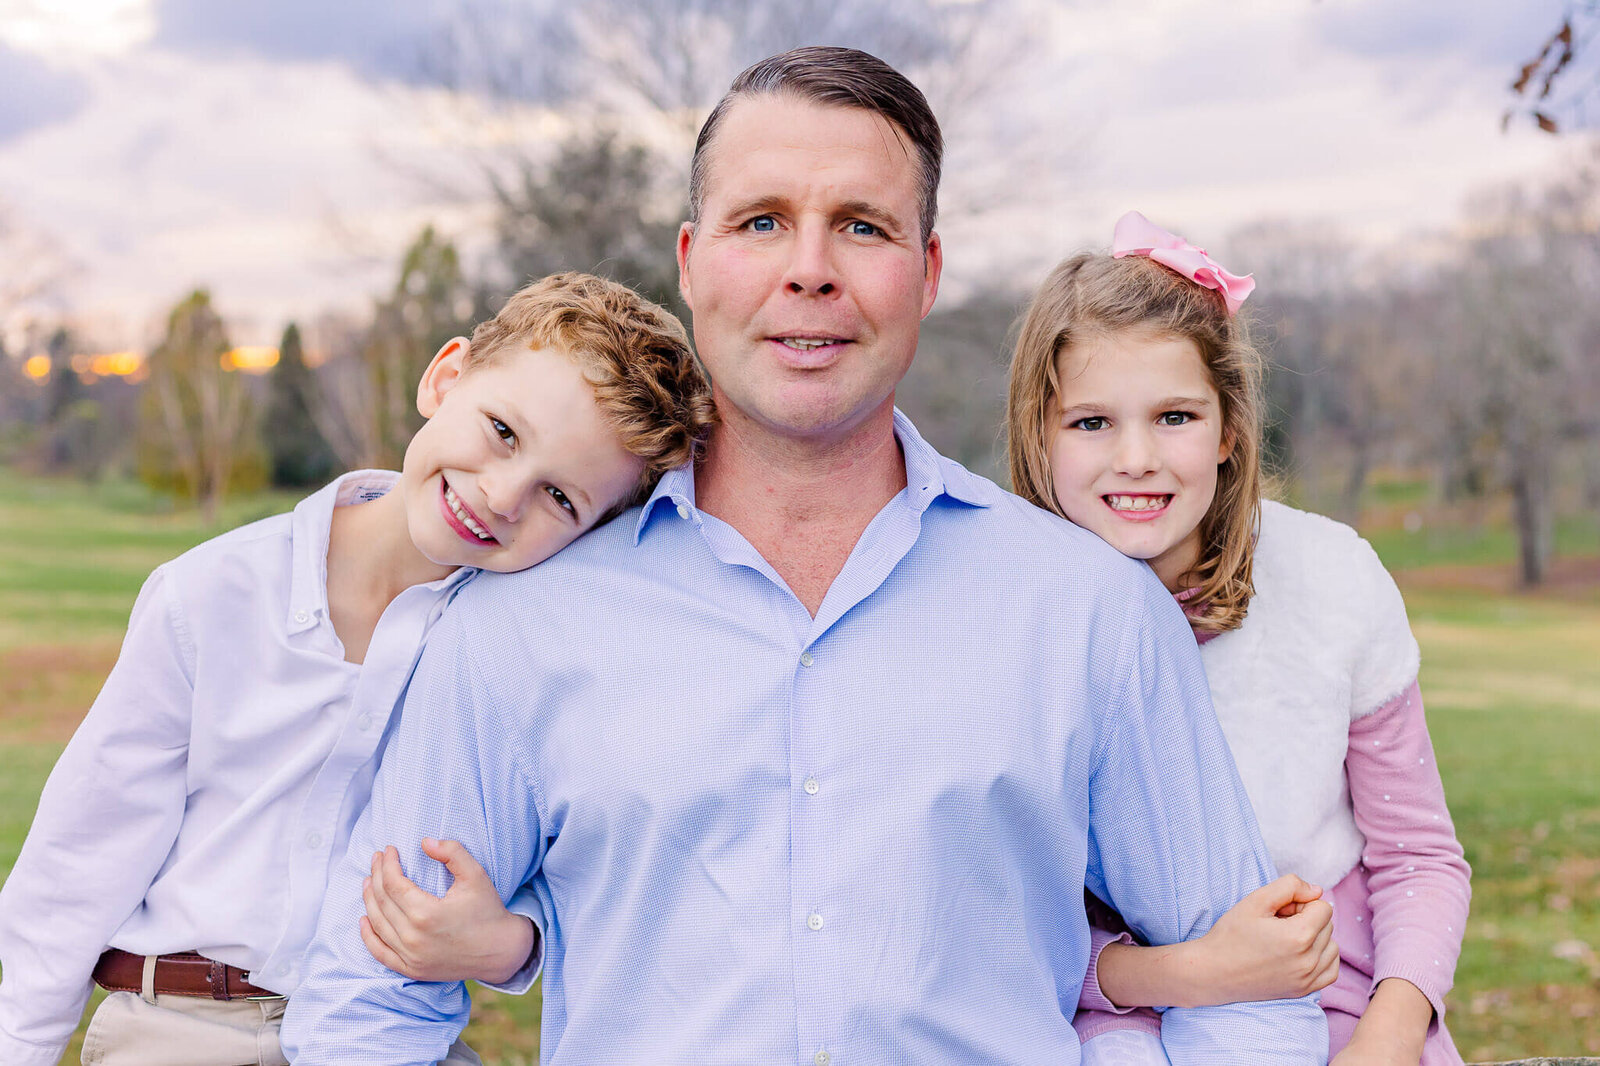 A dad and his two children smiling for Burke family photographer, Melissa Driggers.